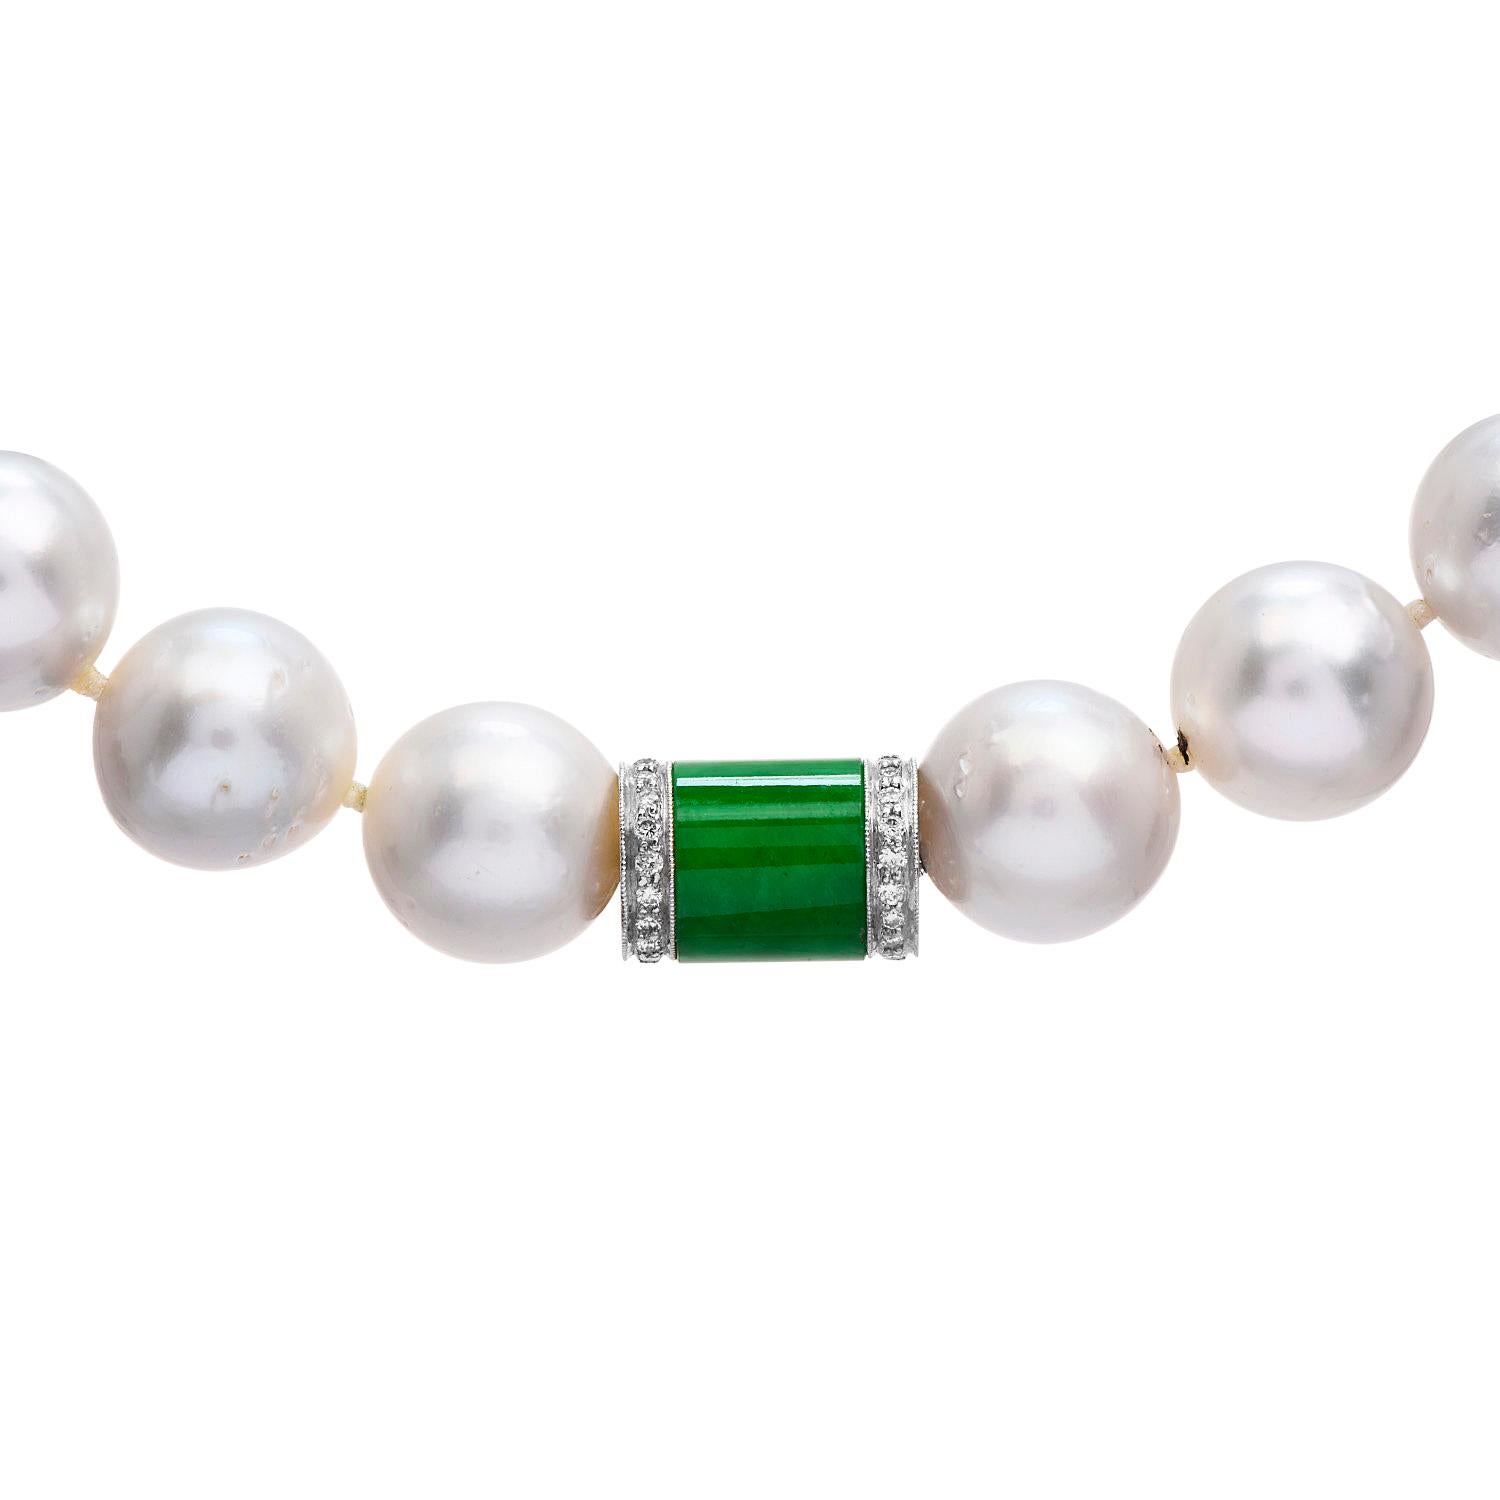 Ostentatious large looking white with silver undertones south sea pearls necklace, with a diamond and jade, accented clasp.

The clasp is crafted in solid 18K white gold, with (30) round cut, pave set diamonds, weighting collectively 0.30 carats,